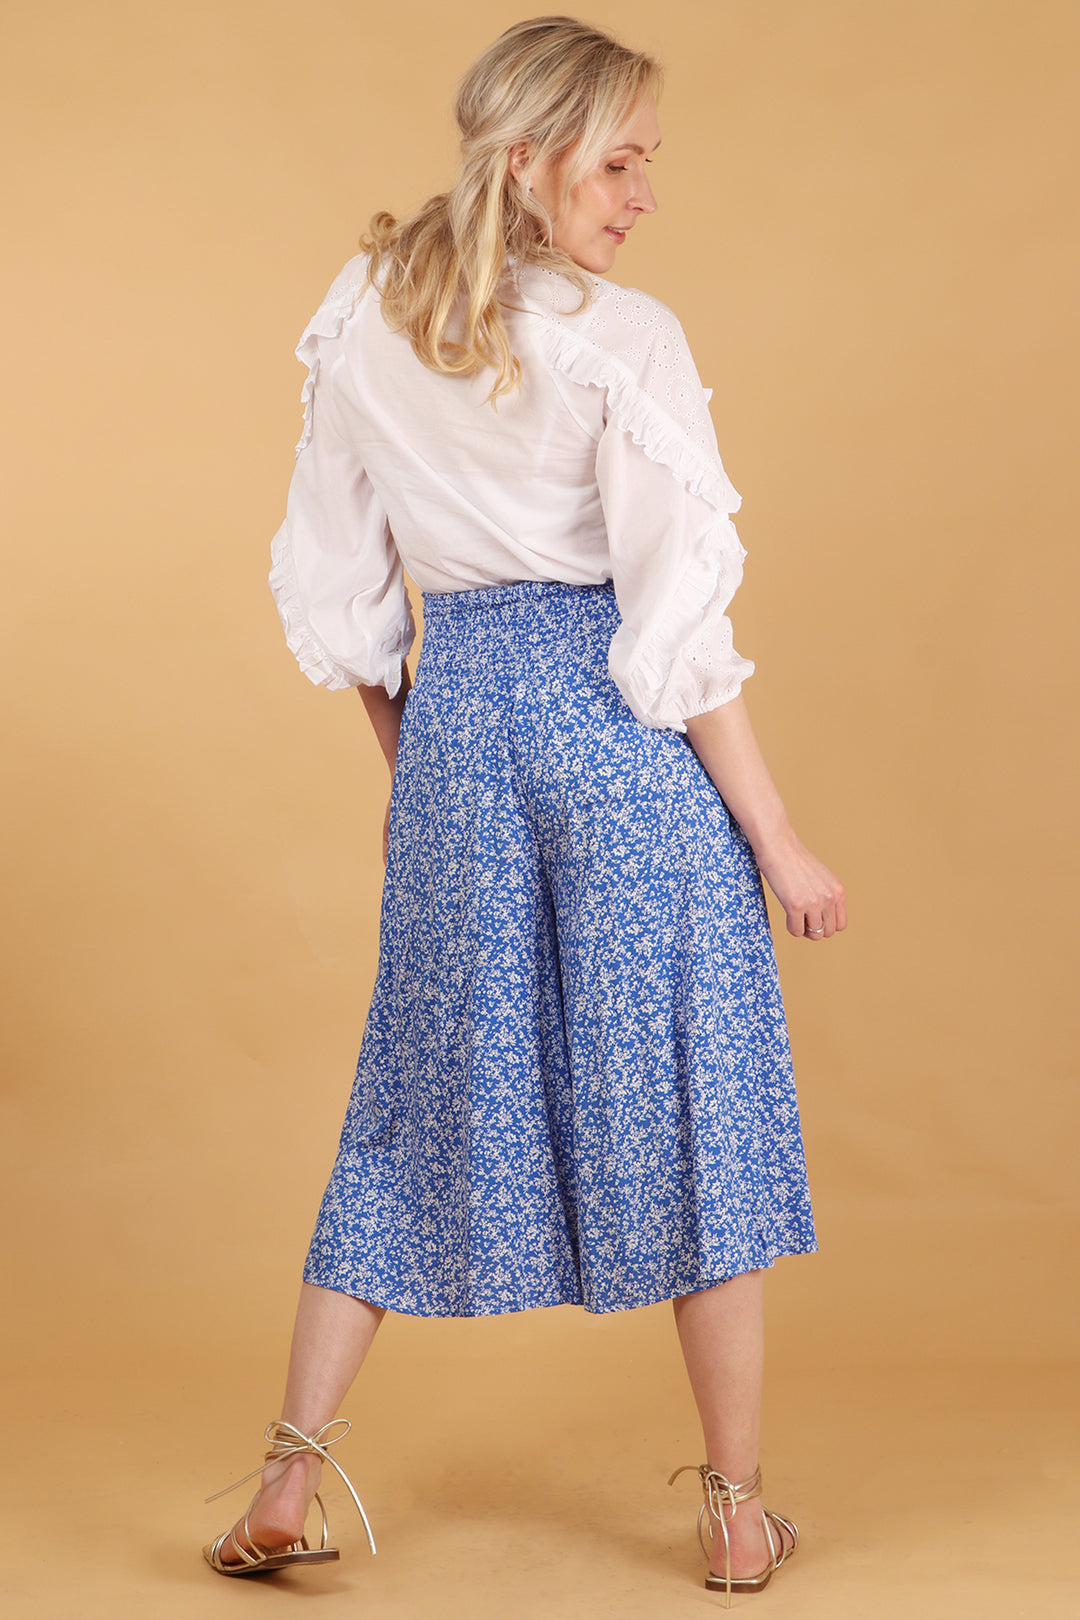 model showing the back of the culottes, showing the all over ditsy floral pattern 